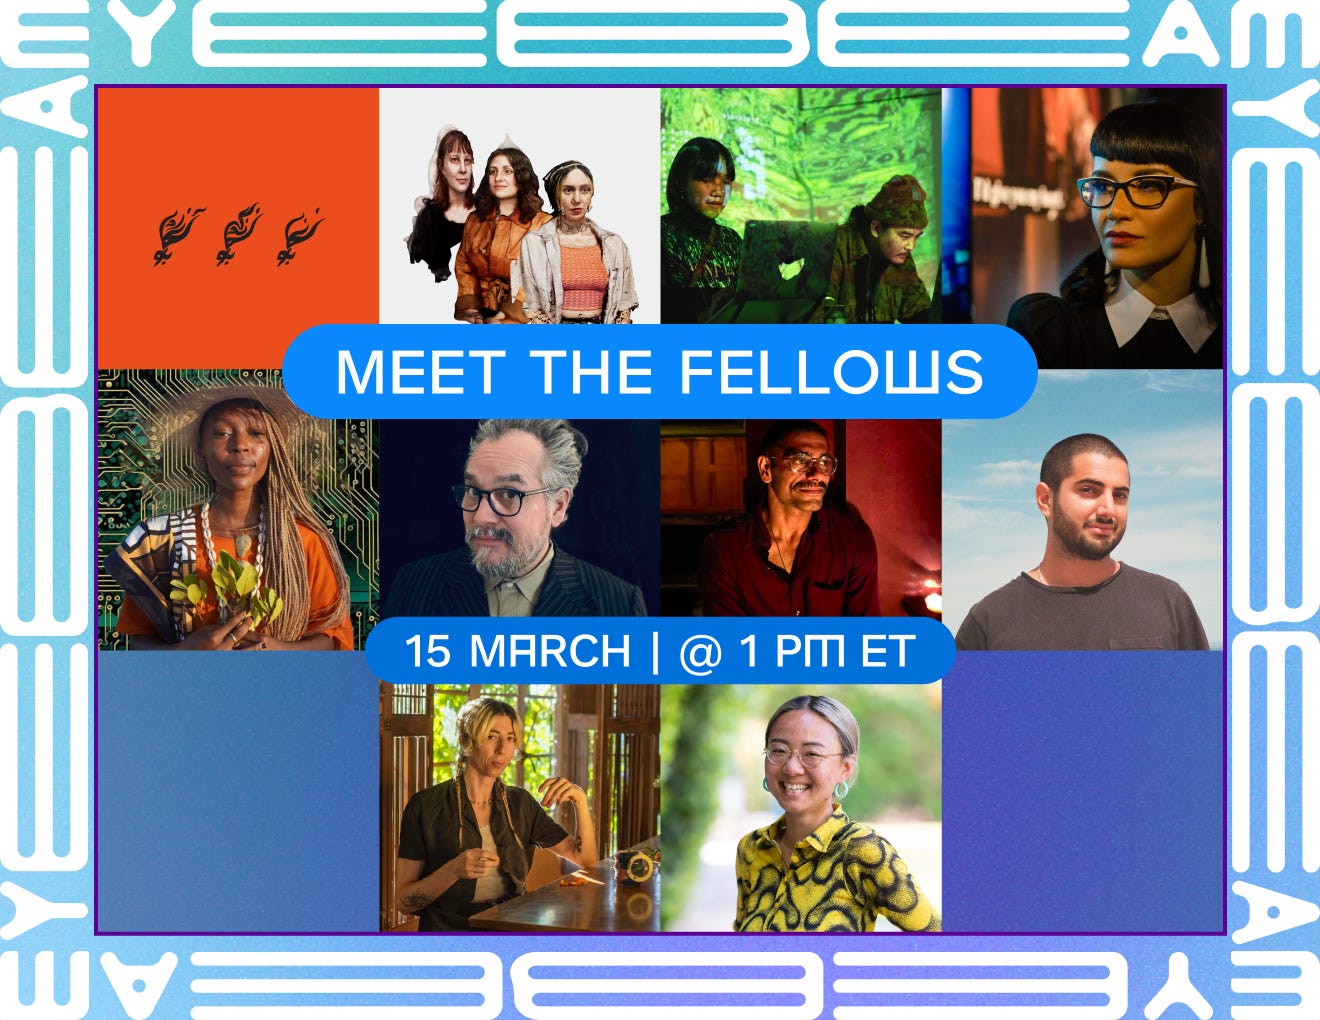 Date for Meet the Fellows event in March 15 at 1 PM Eastern. Portrait of the fellows in order from left to right: Begoo Collective, Cripping CG, elekhlekha, Mashinka Firunts Hakopian, Neema Githere, Raul Enriquez of Community Tech New York, Sahej Rahal, Sam Rabiyah, Sammie Veeler, and Xiaowei Wang.